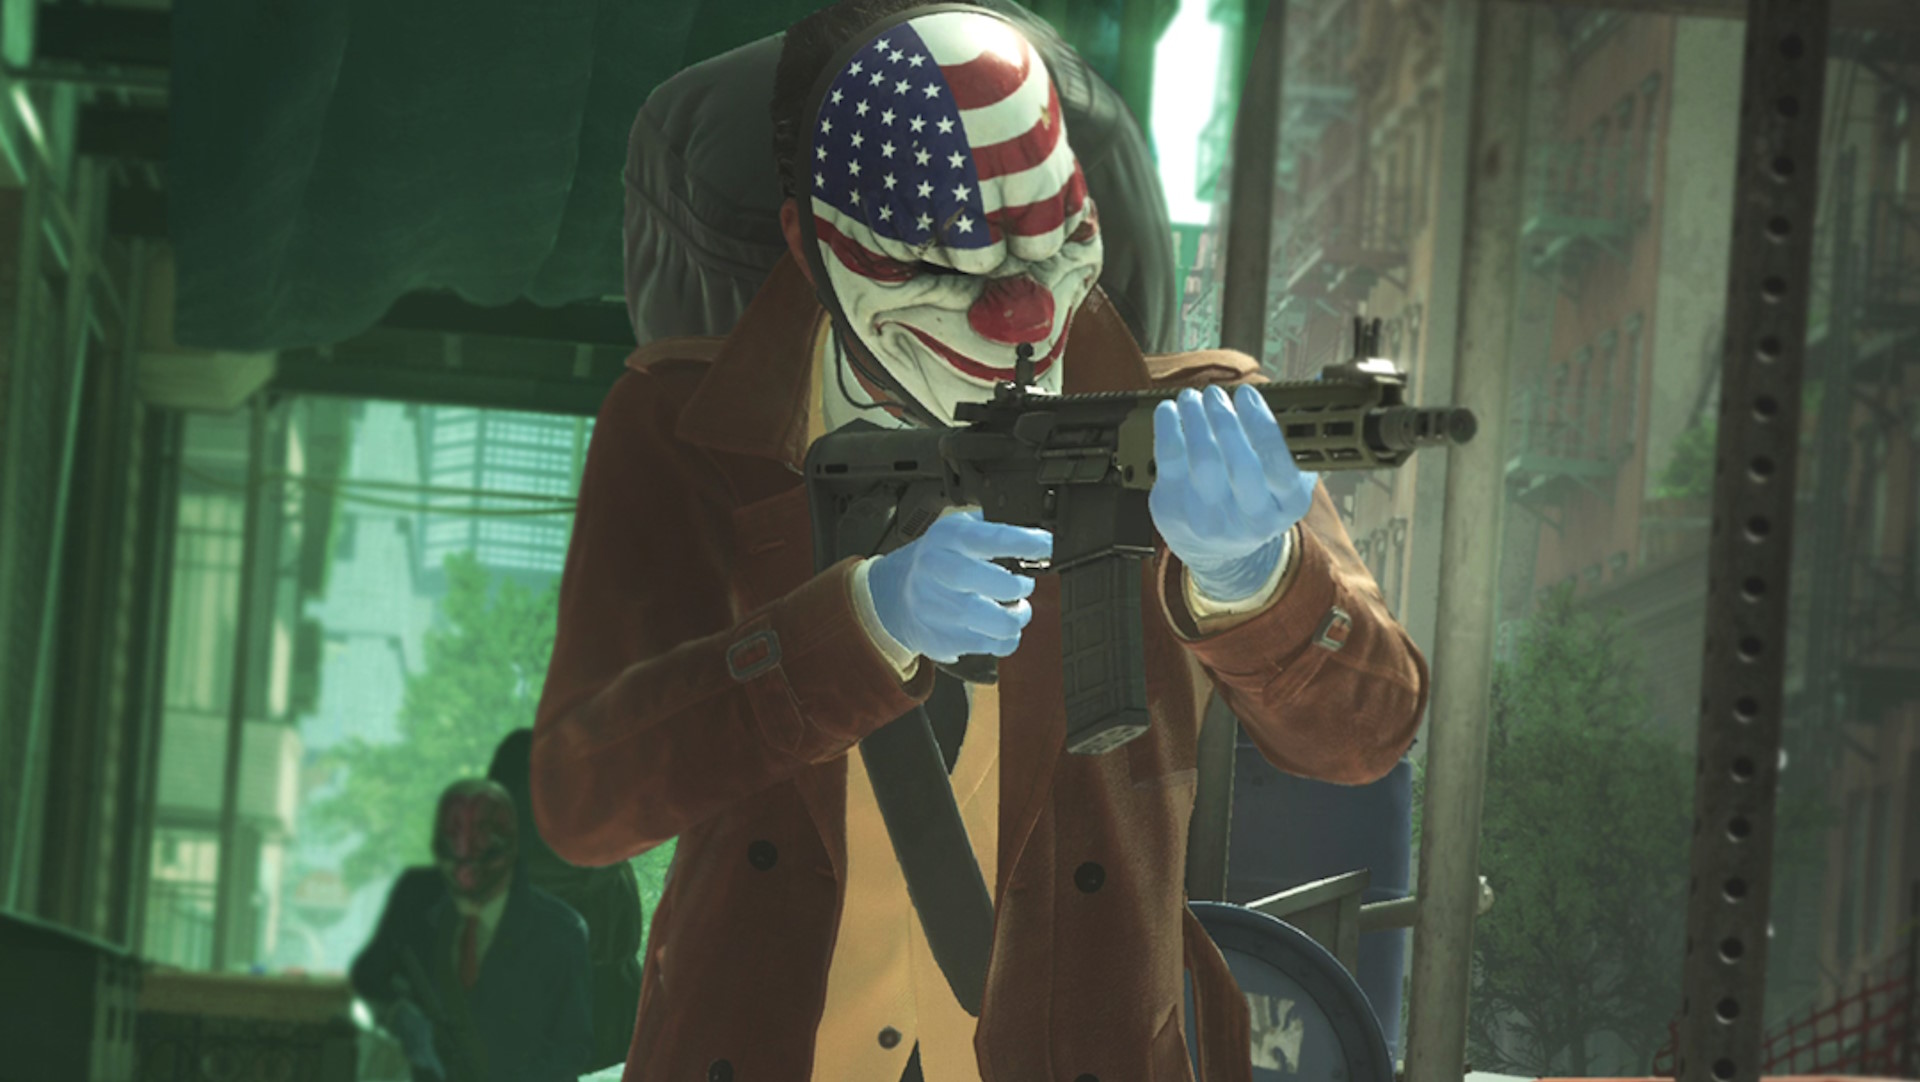 Payday 3 Early Access Launch Hit by Technical Woes: Server Crashes